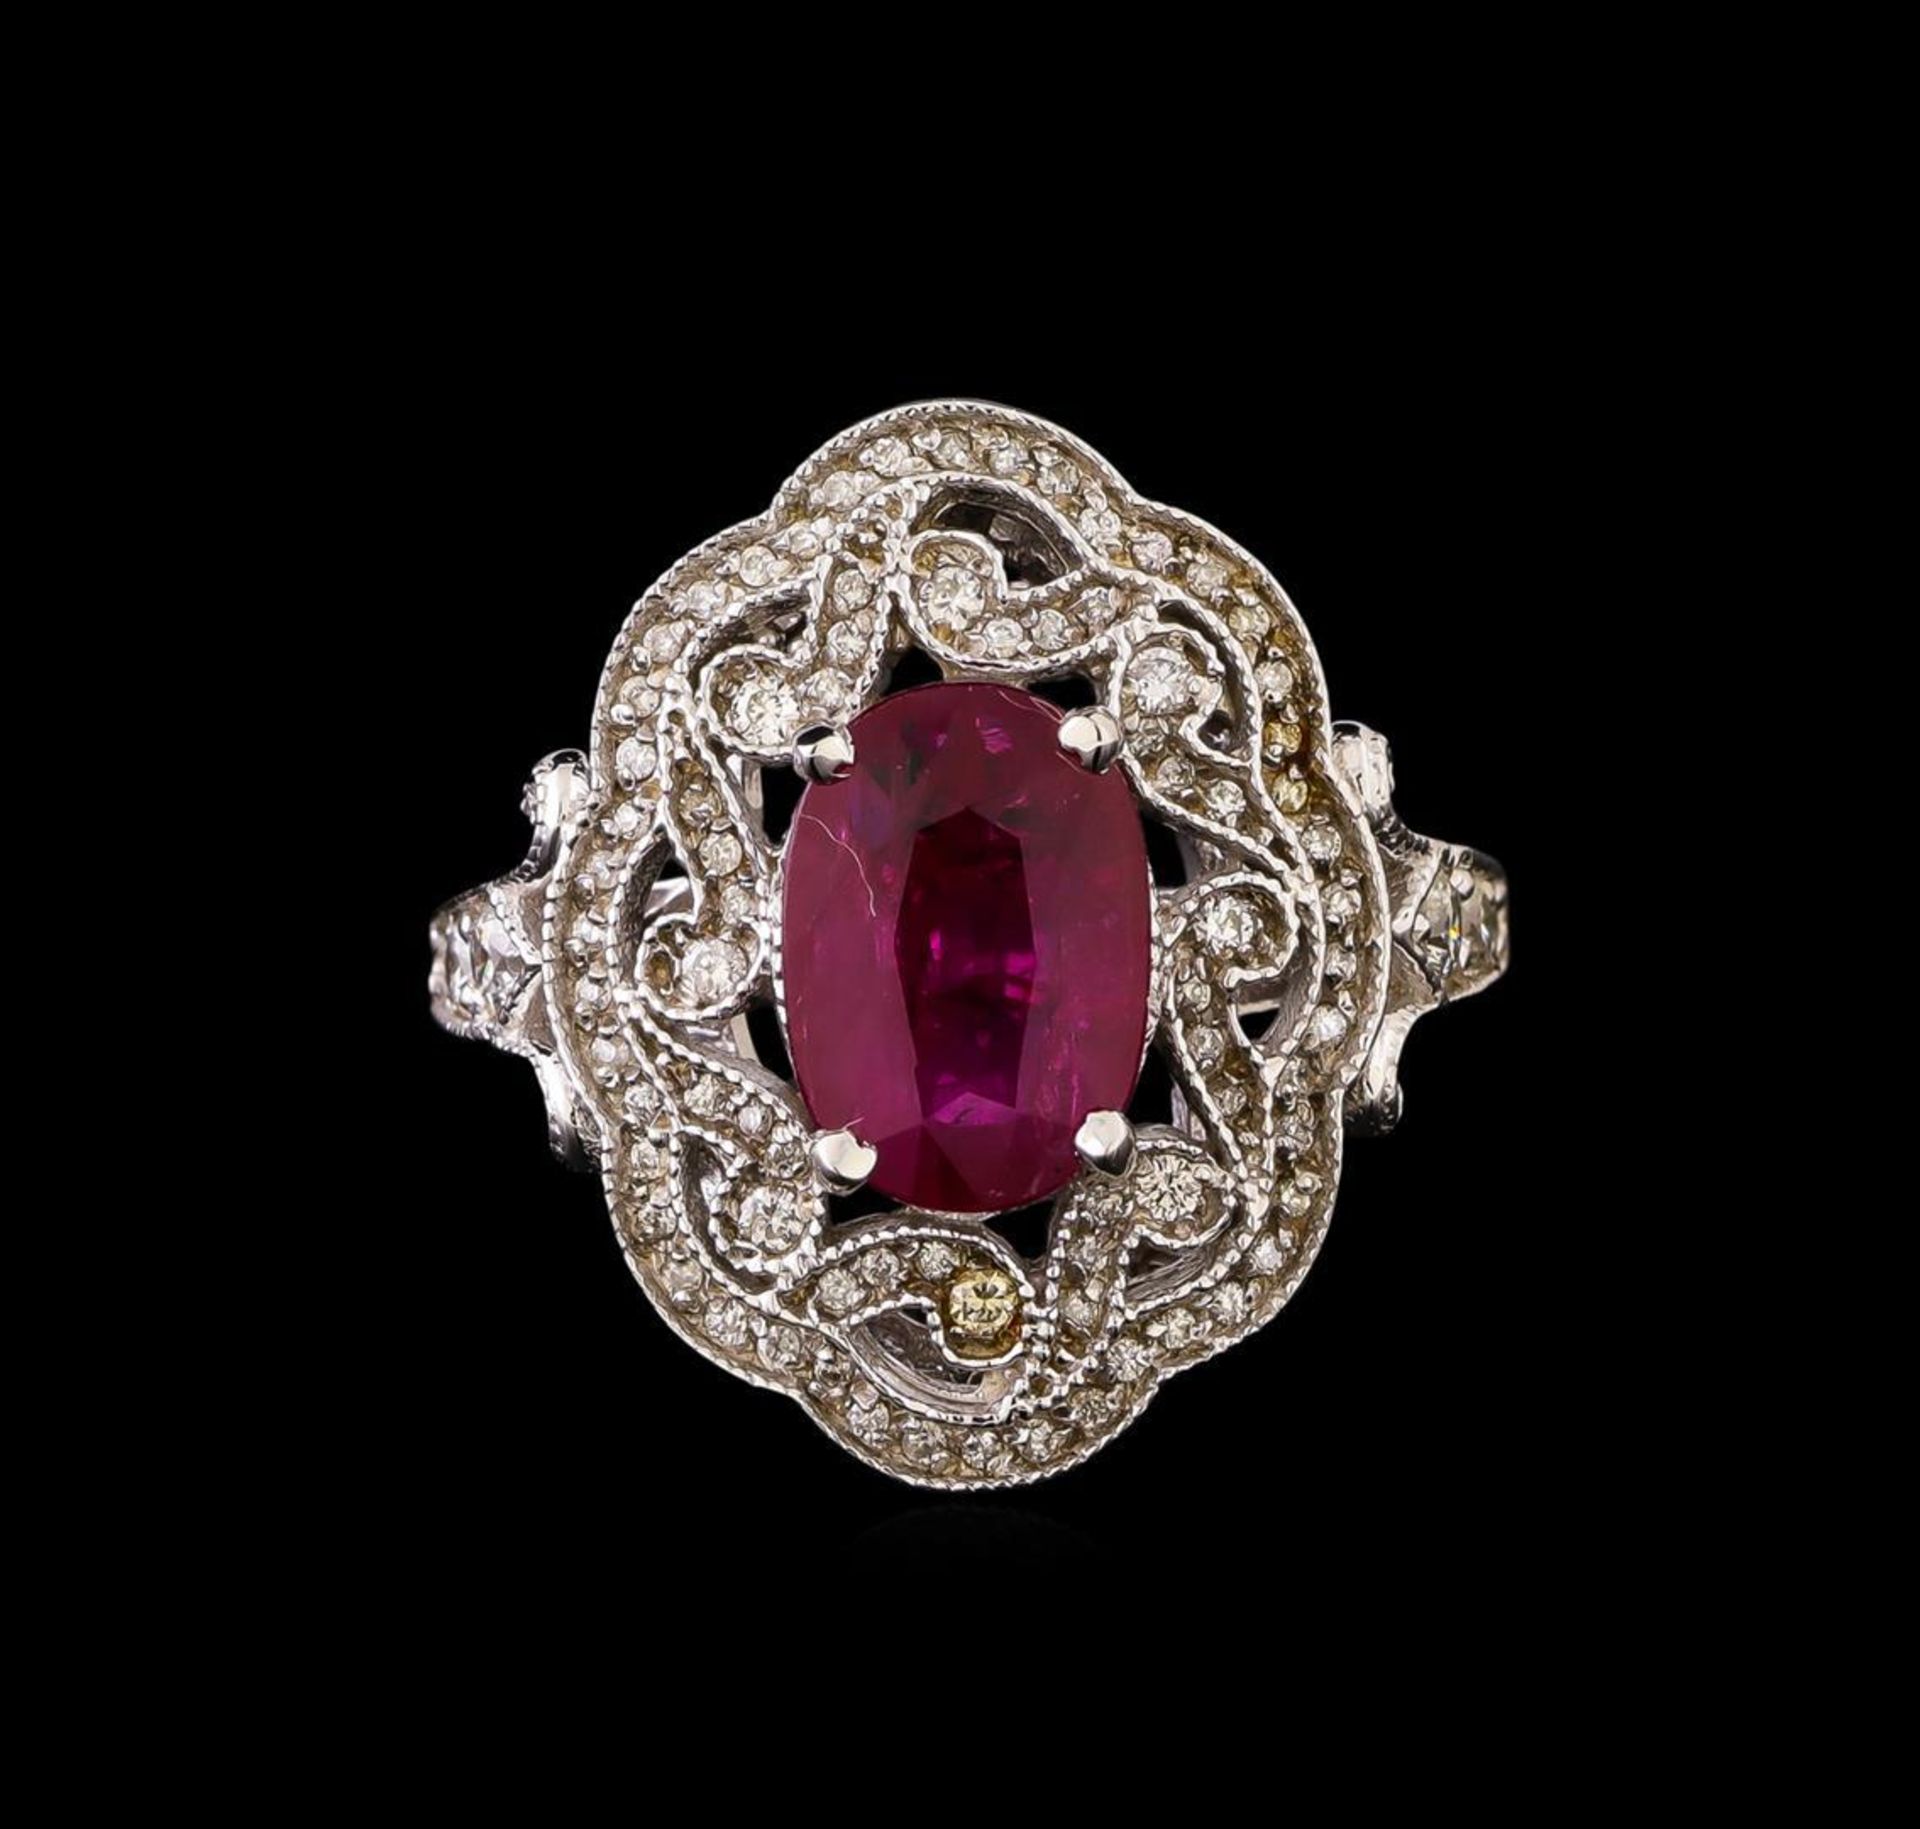 GIA Cert 2.53 ctw Ruby and Diamond Ring - 14KT White Gold - Image 2 of 7